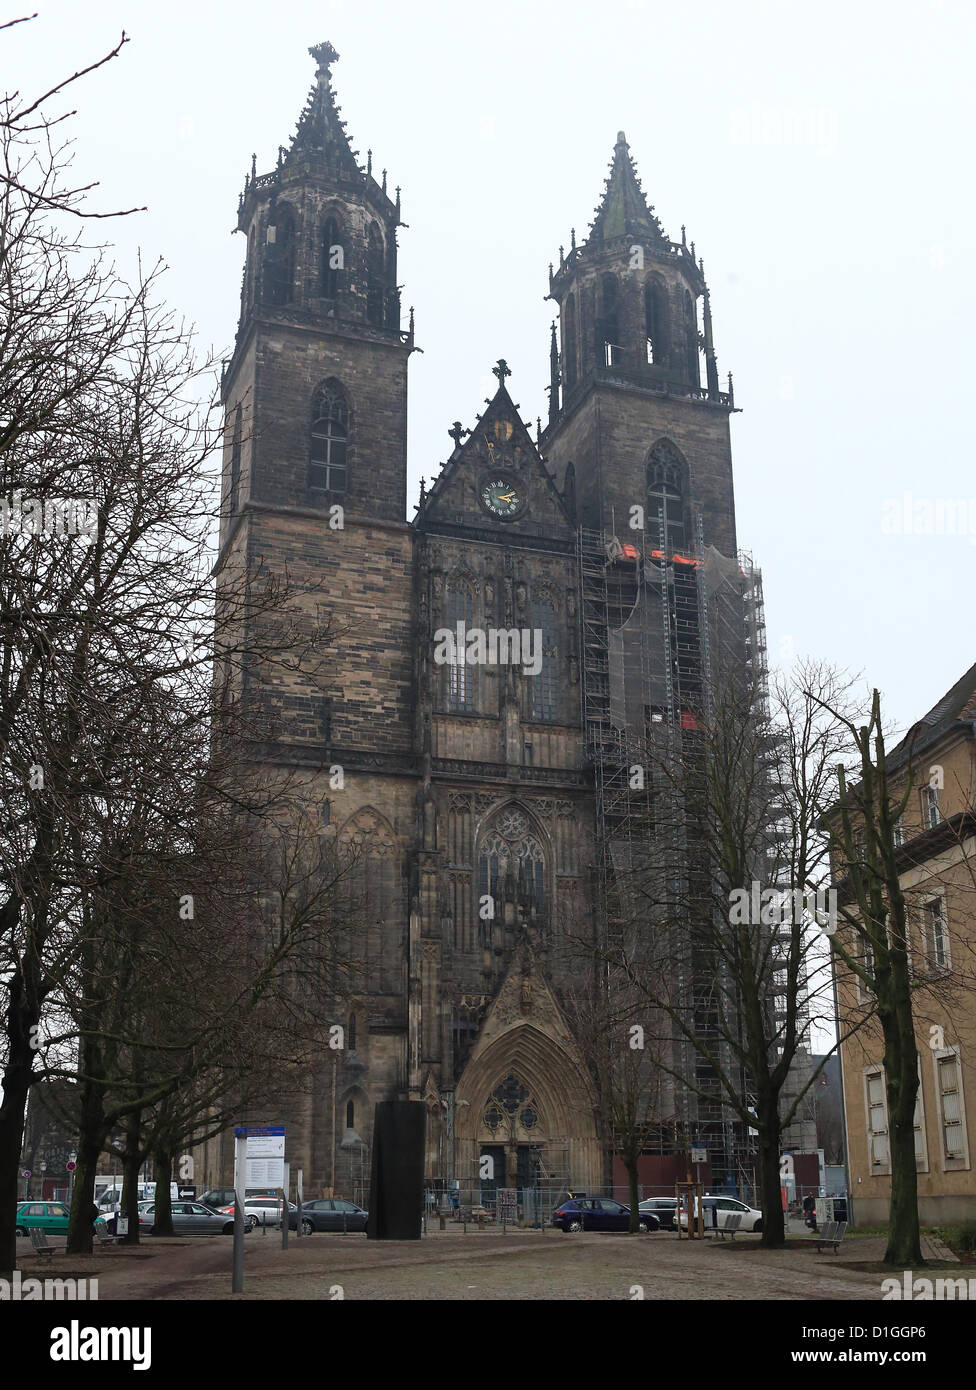 View of the Cathedral of Saints Catherine and Maurice in Magdeburg, Germany, 19 December 2012. The association 'Cathedral of Magdeburg' which supports the cathedral, presented the restored northern tower for the first time. The cathedral is the oldest Gothic cathedral on German soil and the principal church of the Evangelical Church in Central Germany. Photo: Jens Wolf Stock Photo